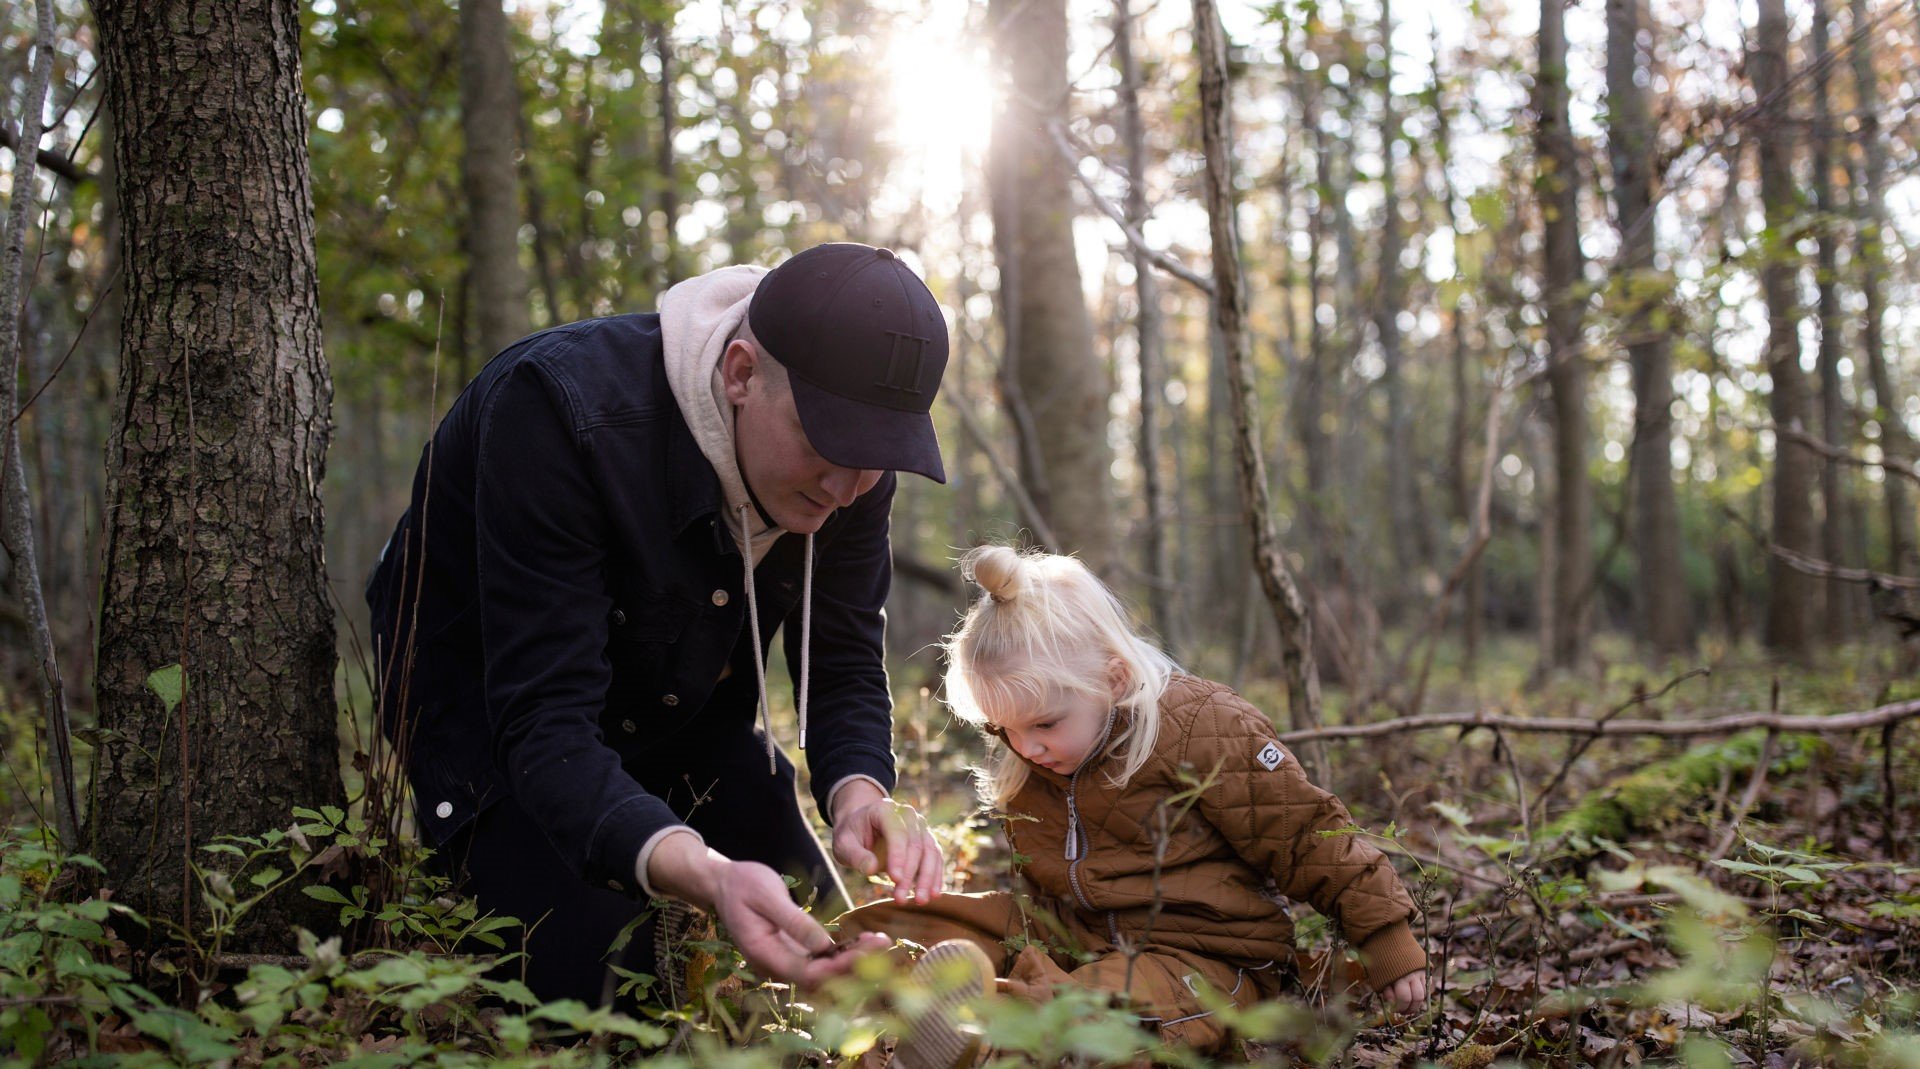 man is playing with a child in the forest